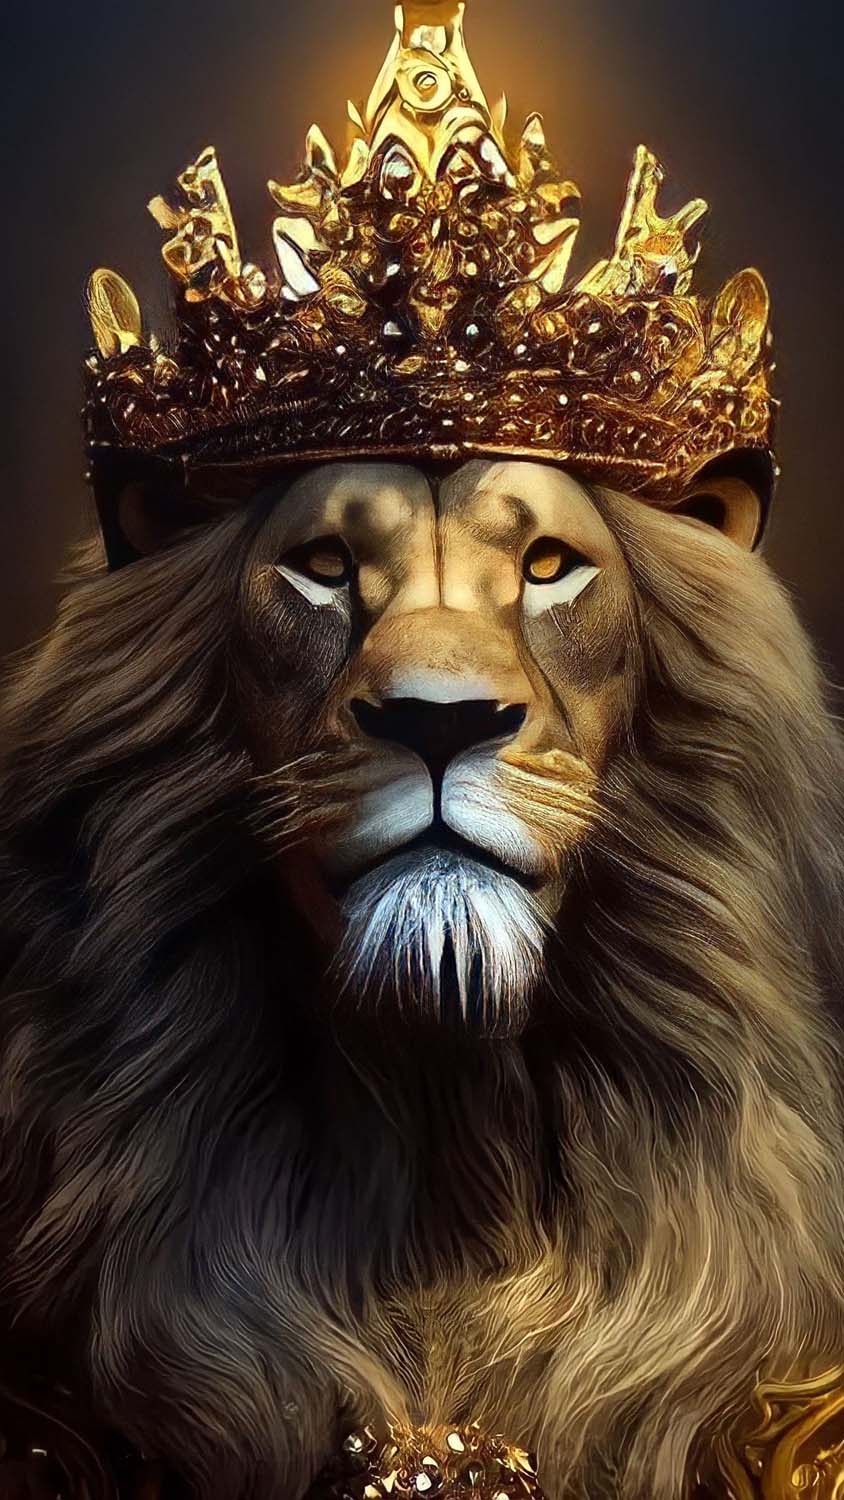 The King iPhone Wallpaper HD